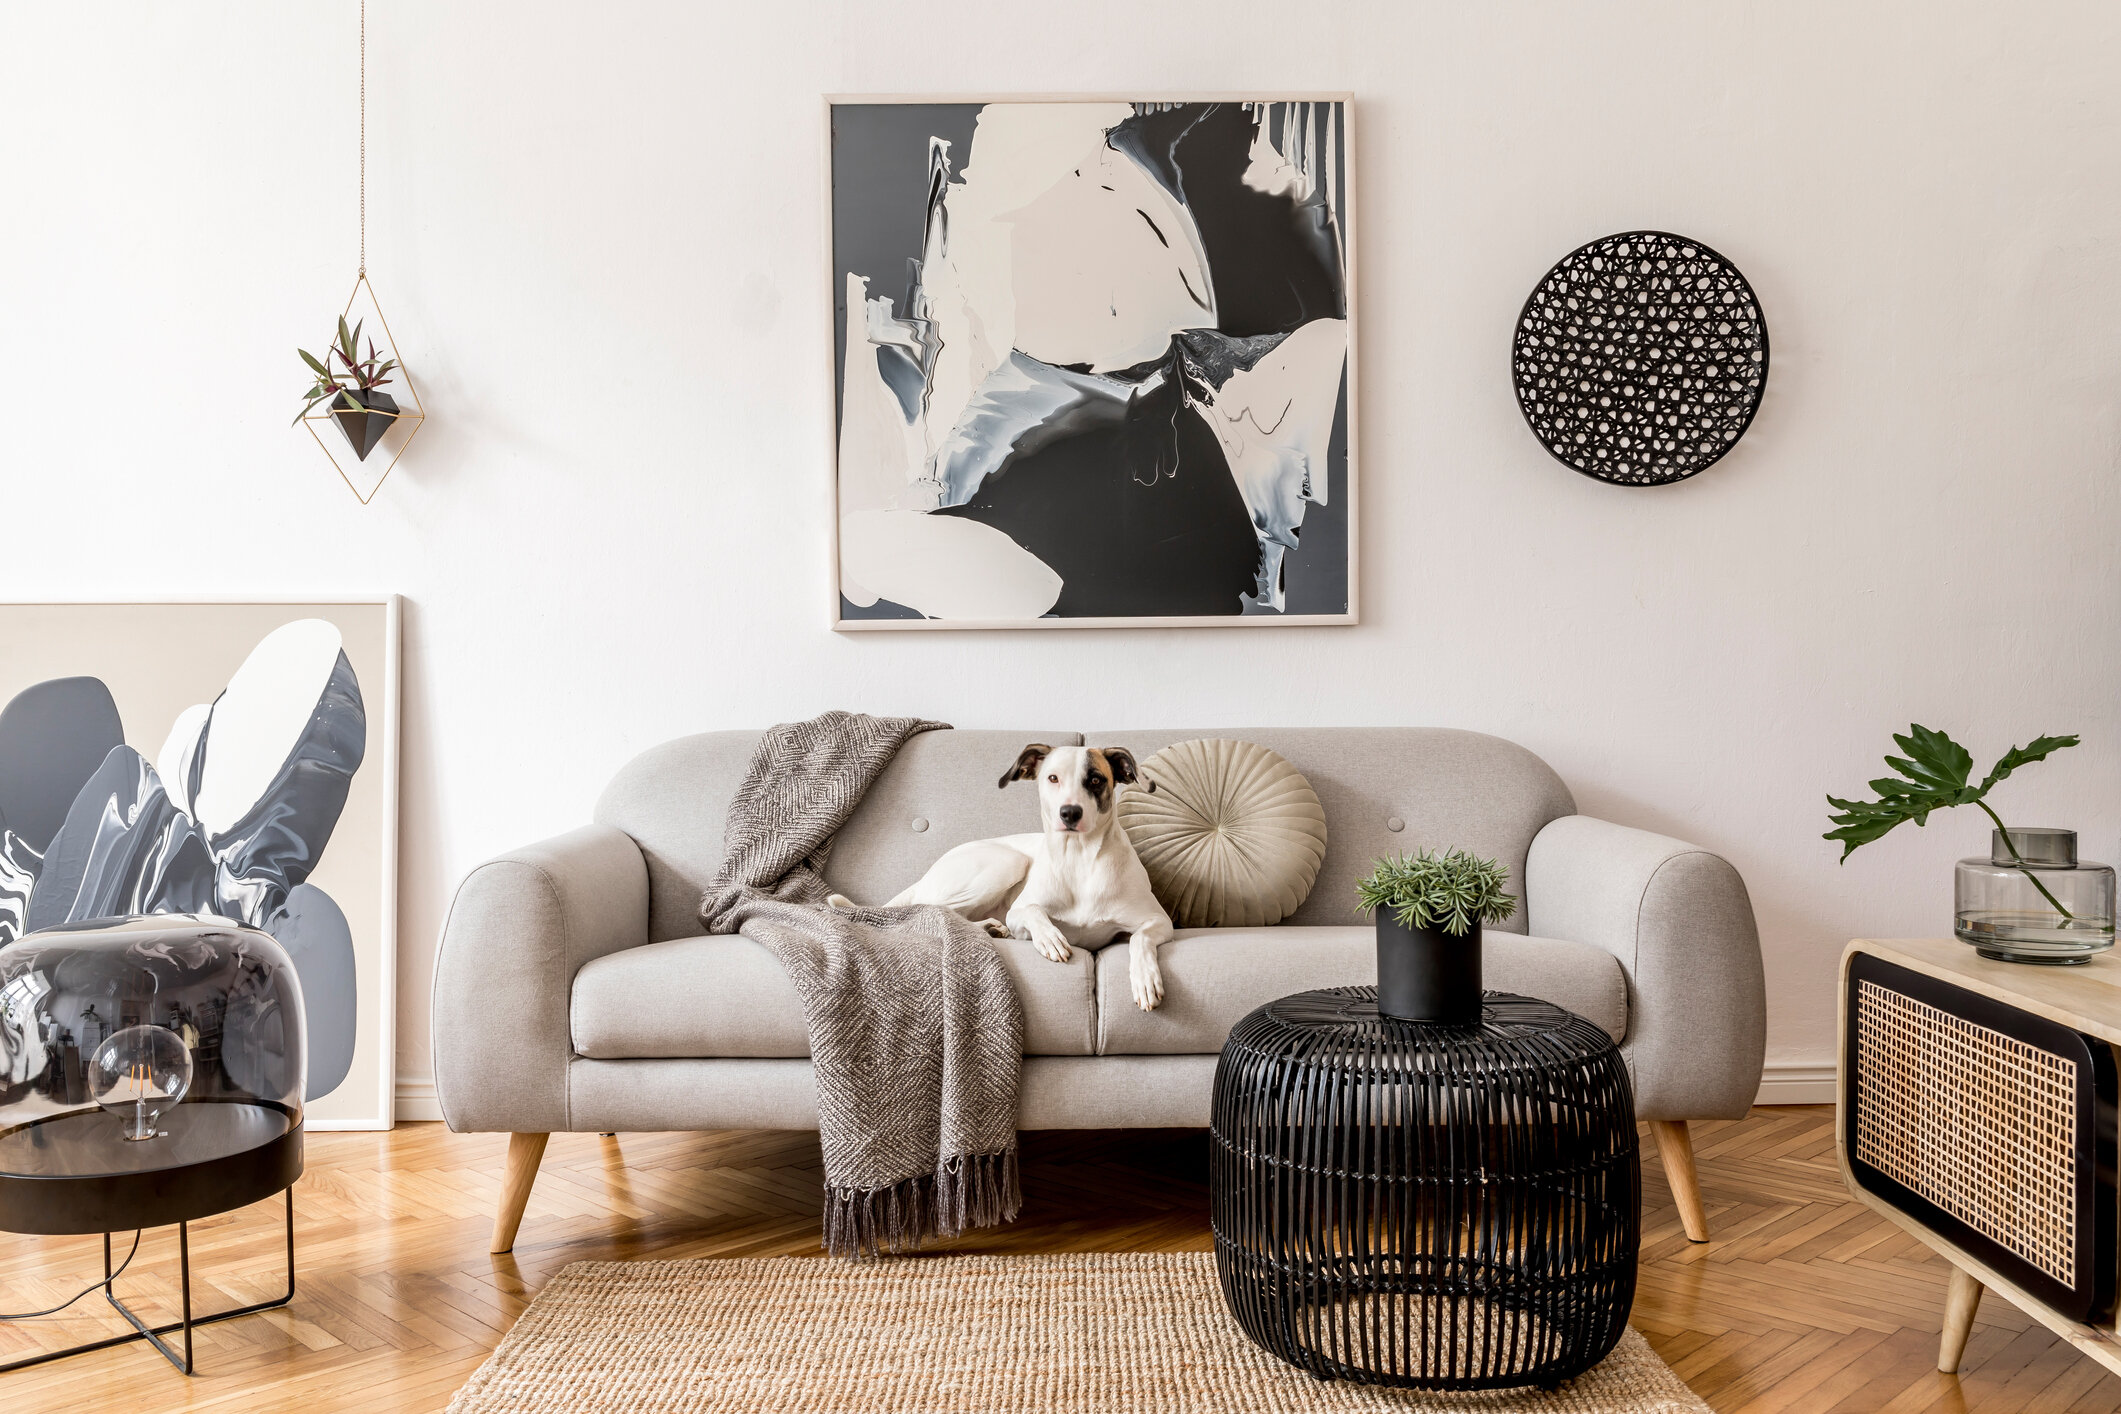 Positive Energy Decor: How to Fill Your Home With Good Vibes